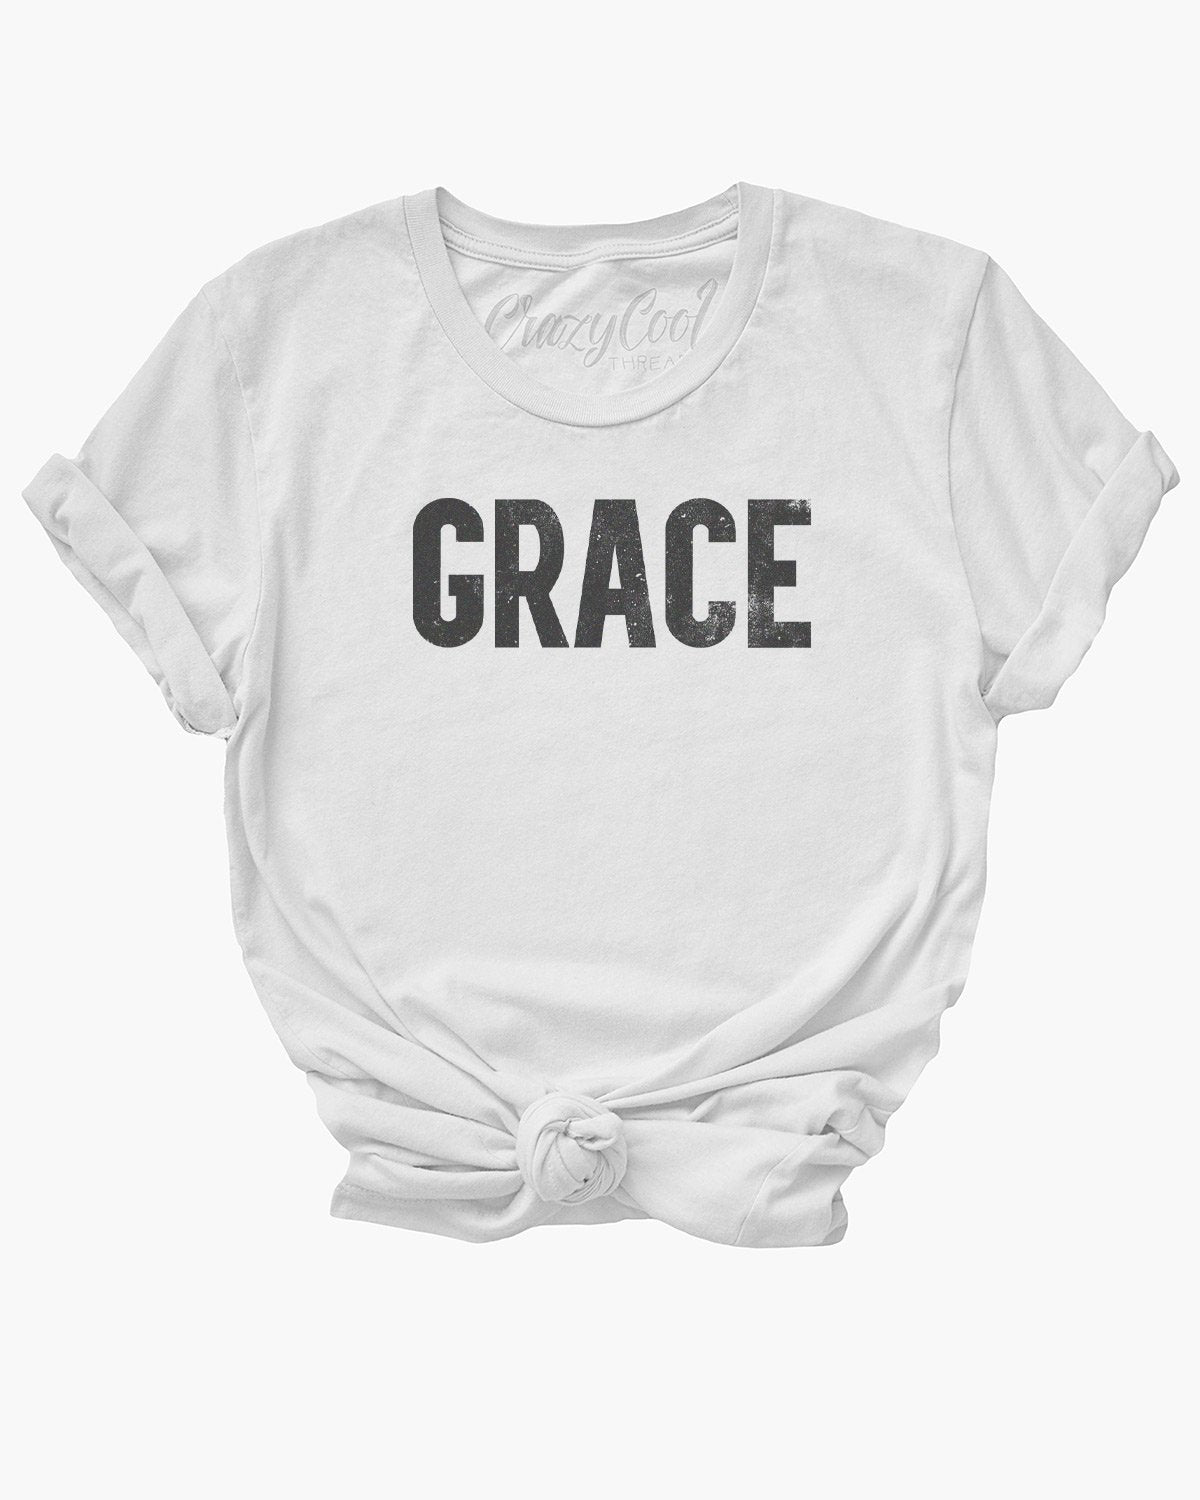 Grace Bold Graphic Tee